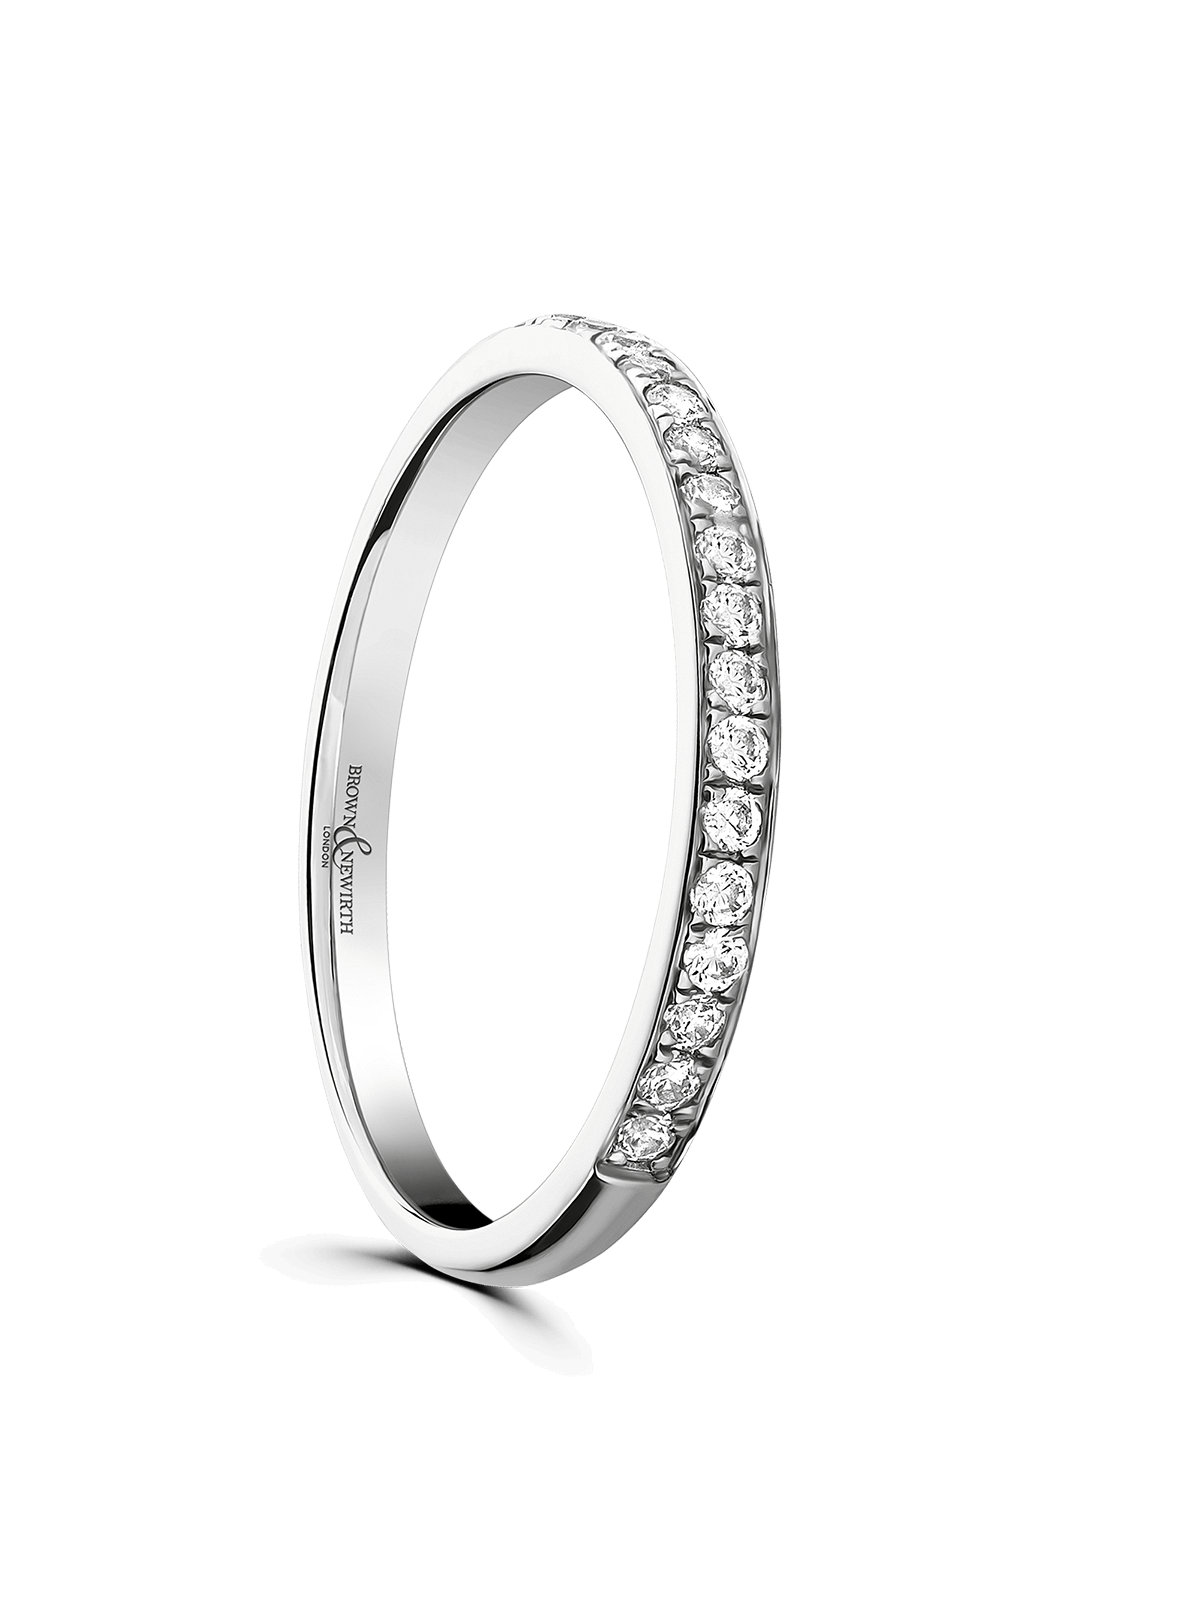 Brown & Newirth Sweetheart 0.15ct Brilliant Cut Diamond Eternity Ring in 9ct White Gold